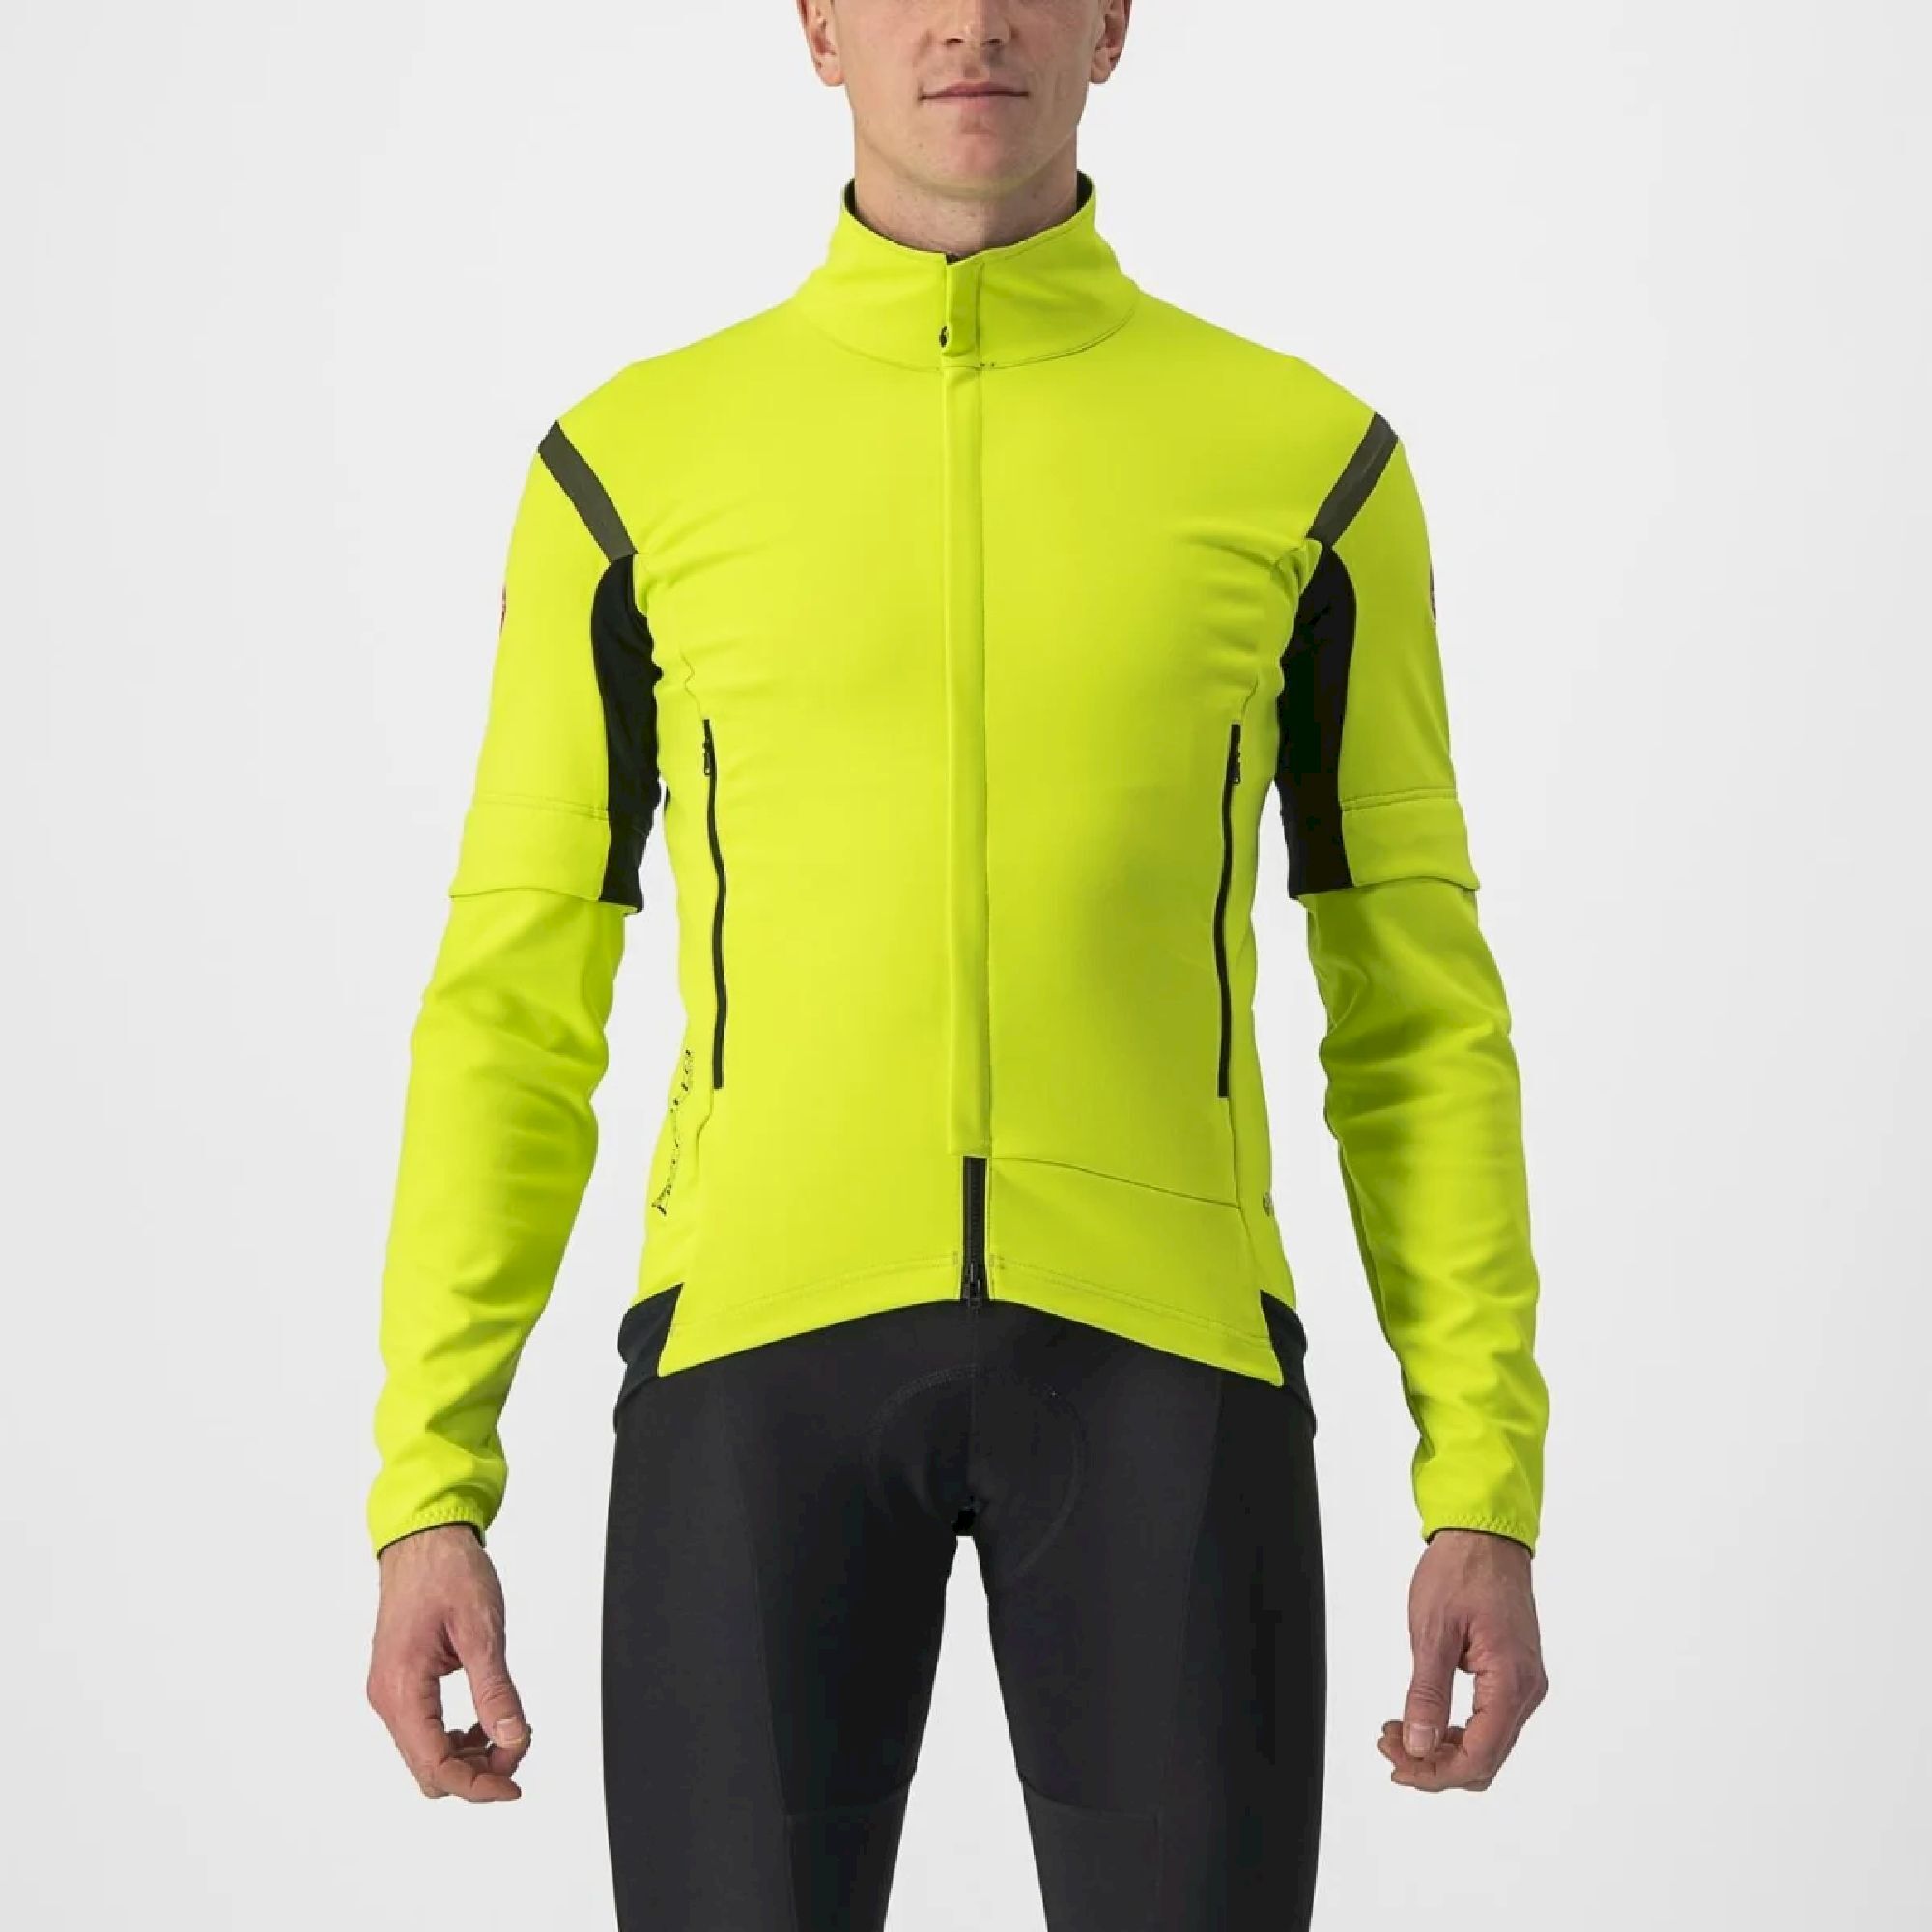 Castelli Perfetto RoS 2 Convertible Jacket - Cycling windproof jacket - Men's | Hardloop